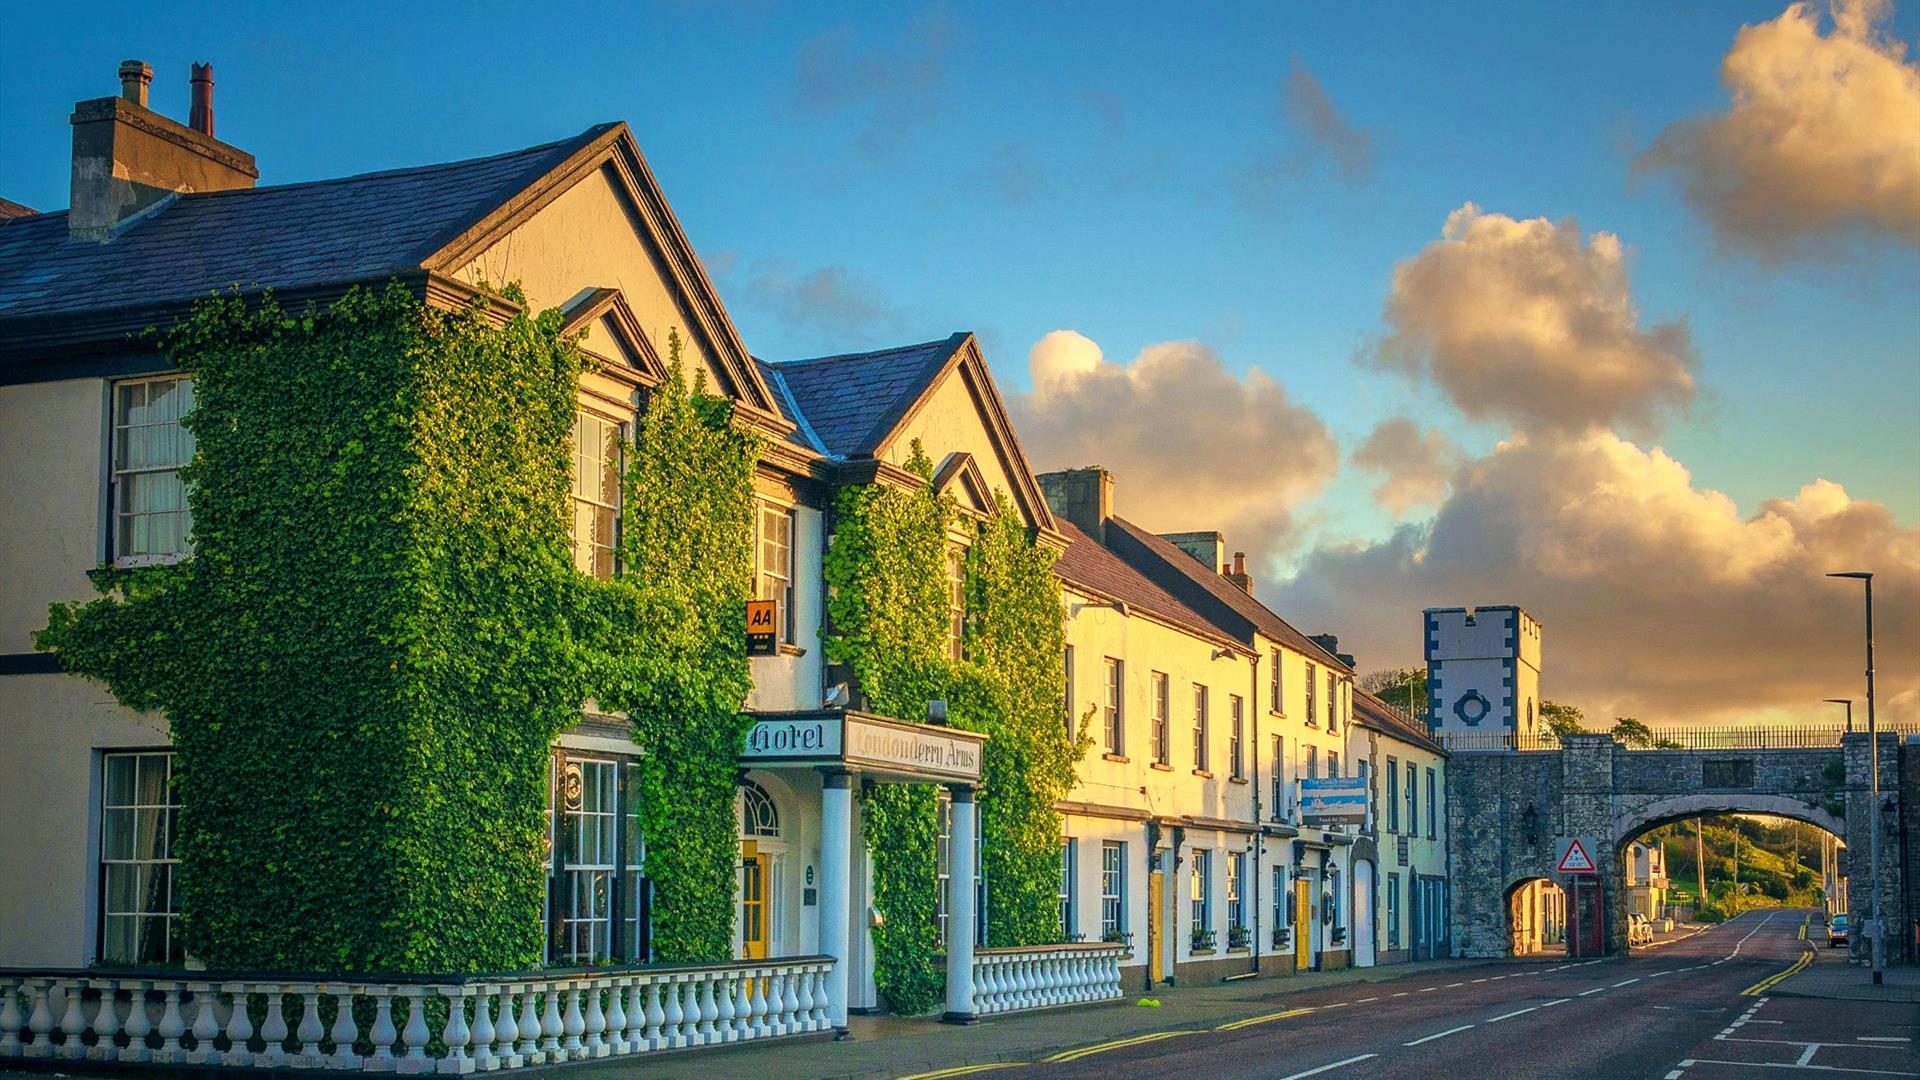 Conferences at the Londonderry Arms Hotel